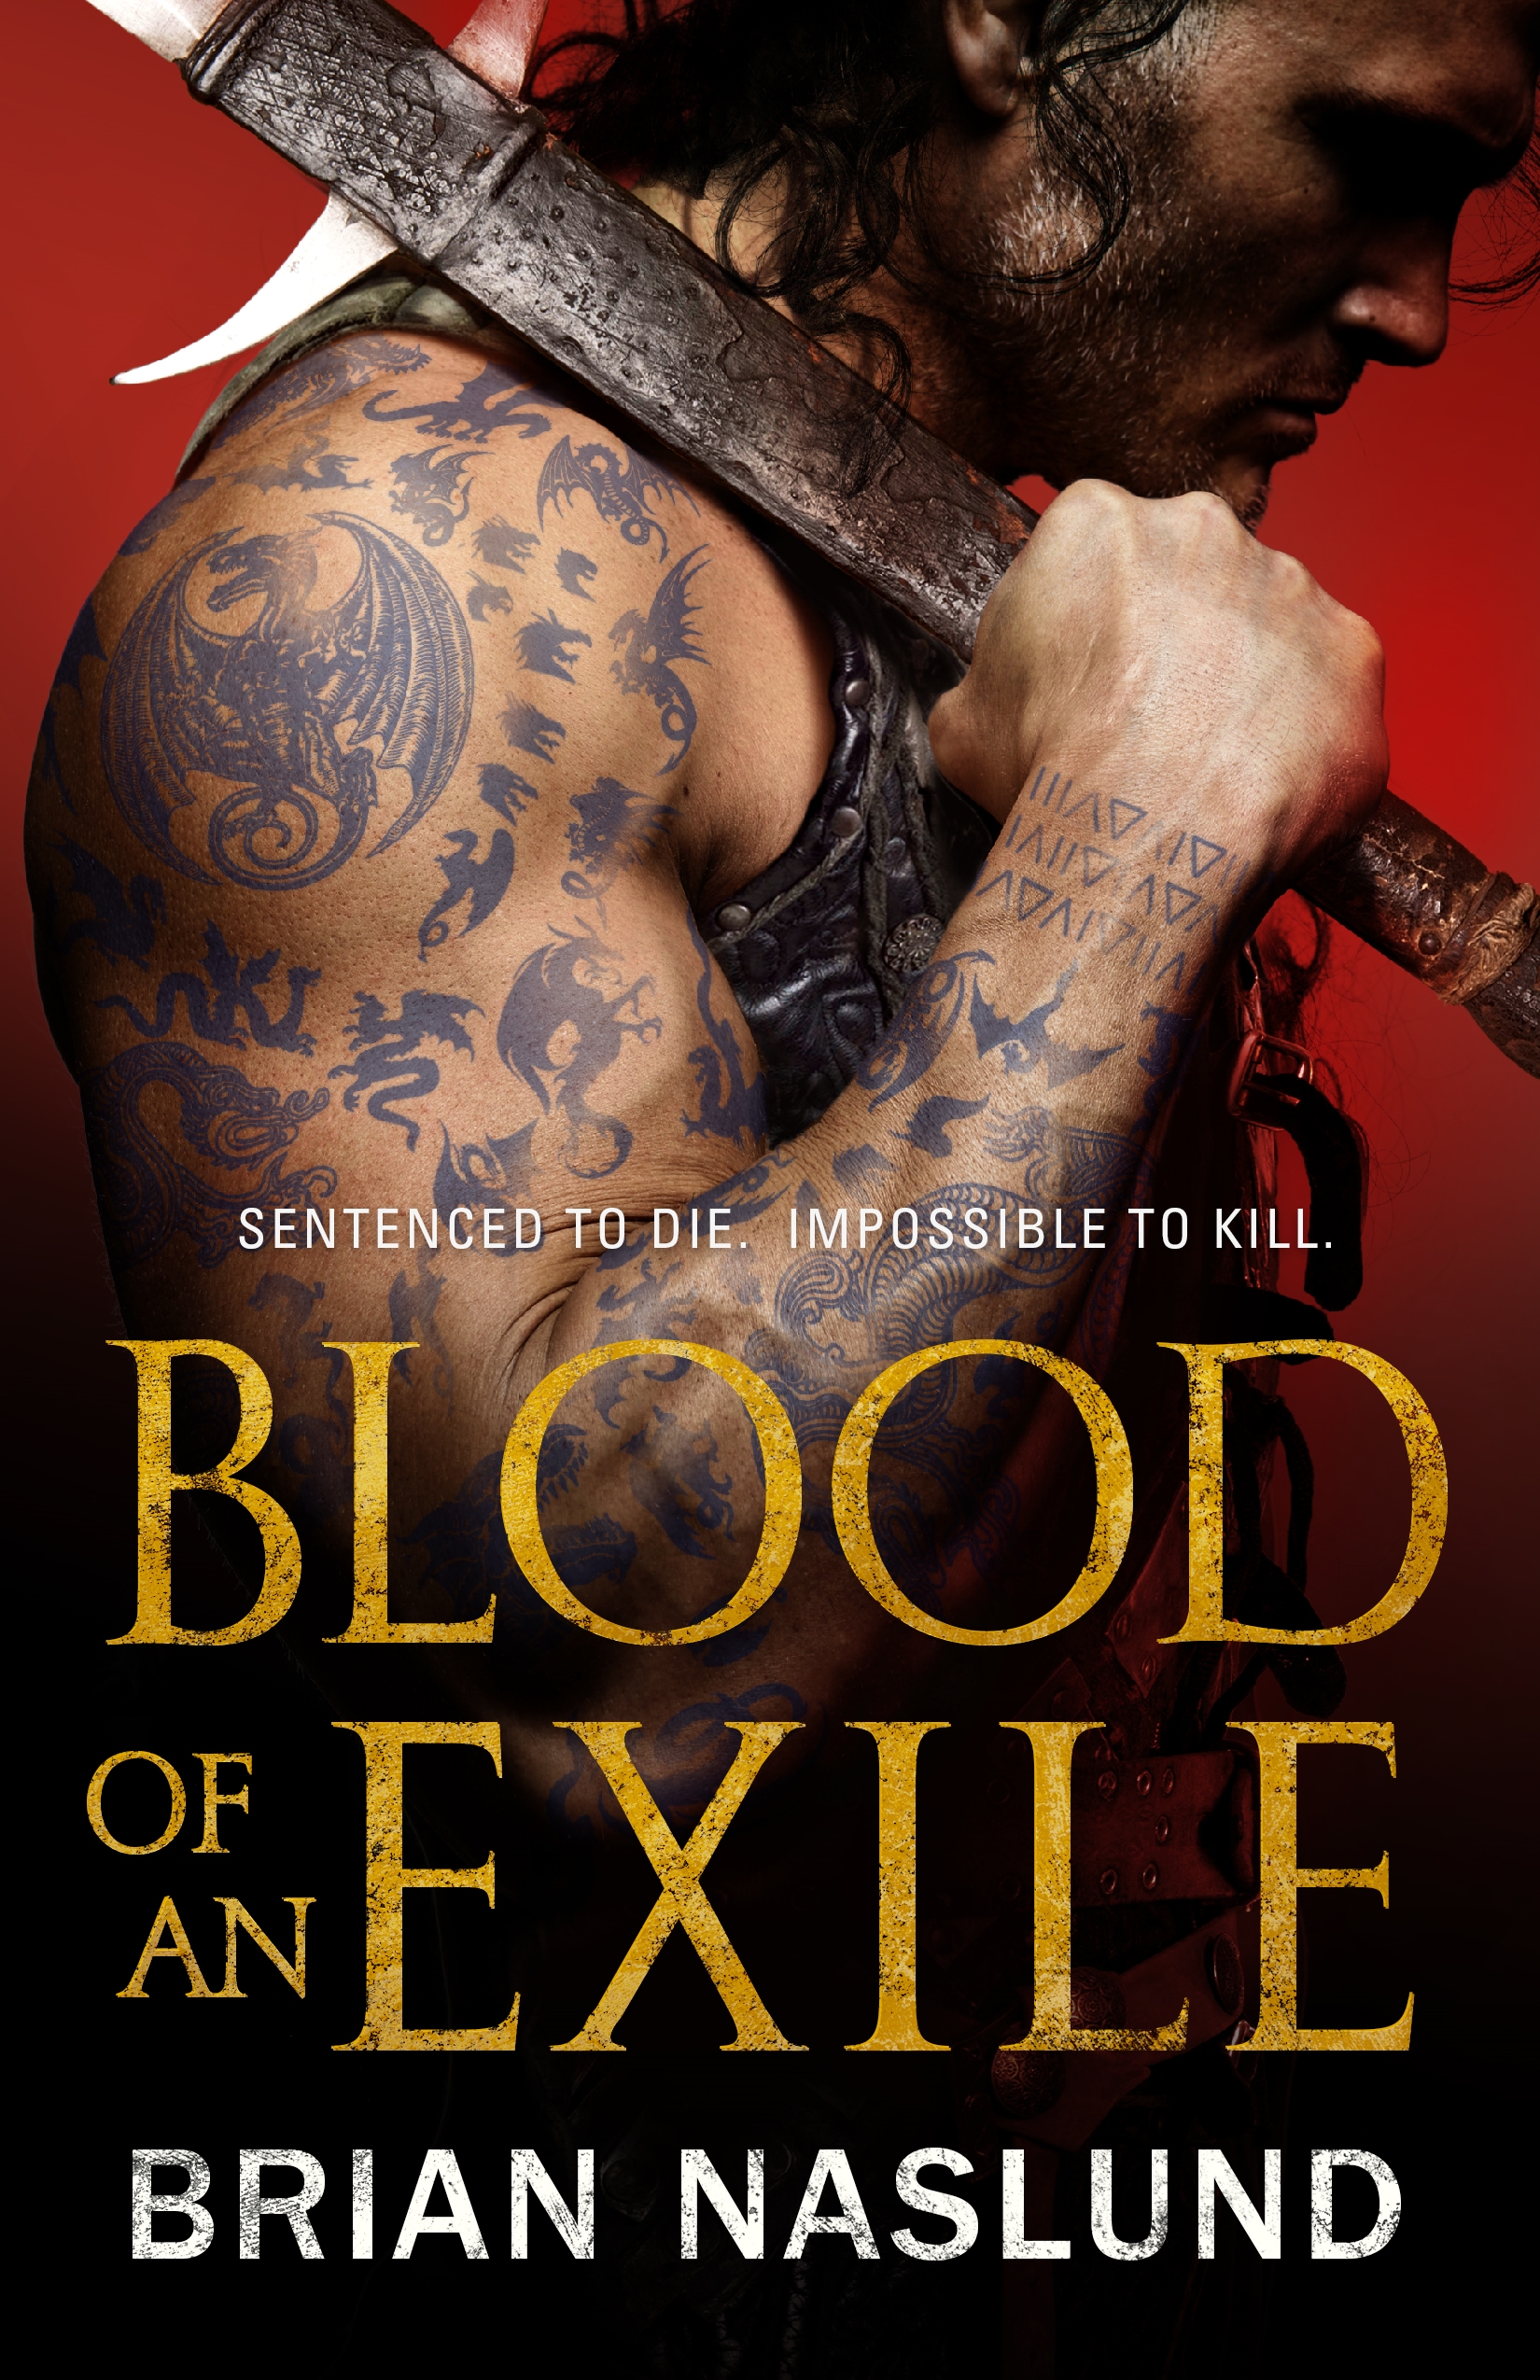 Blood of an Exile by Brian Naslund